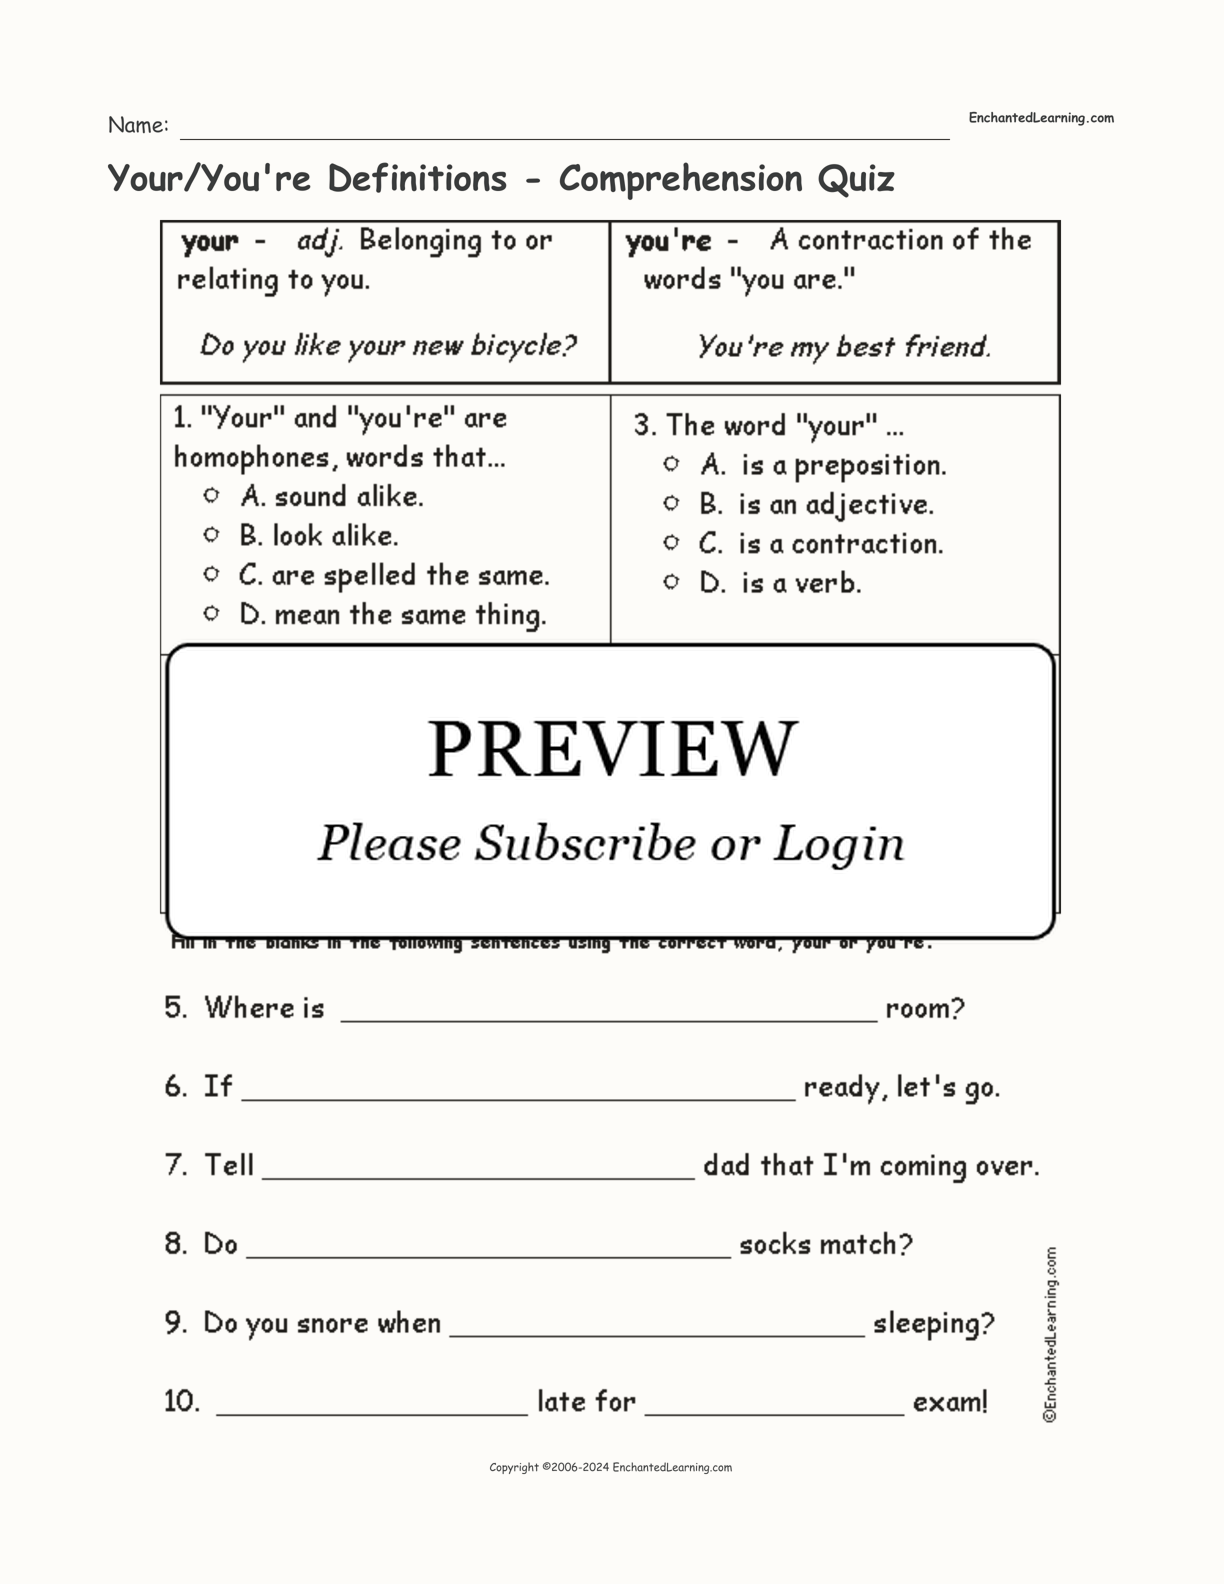 Your/You're Definitions - Comprehension Quiz interactive worksheet page 1